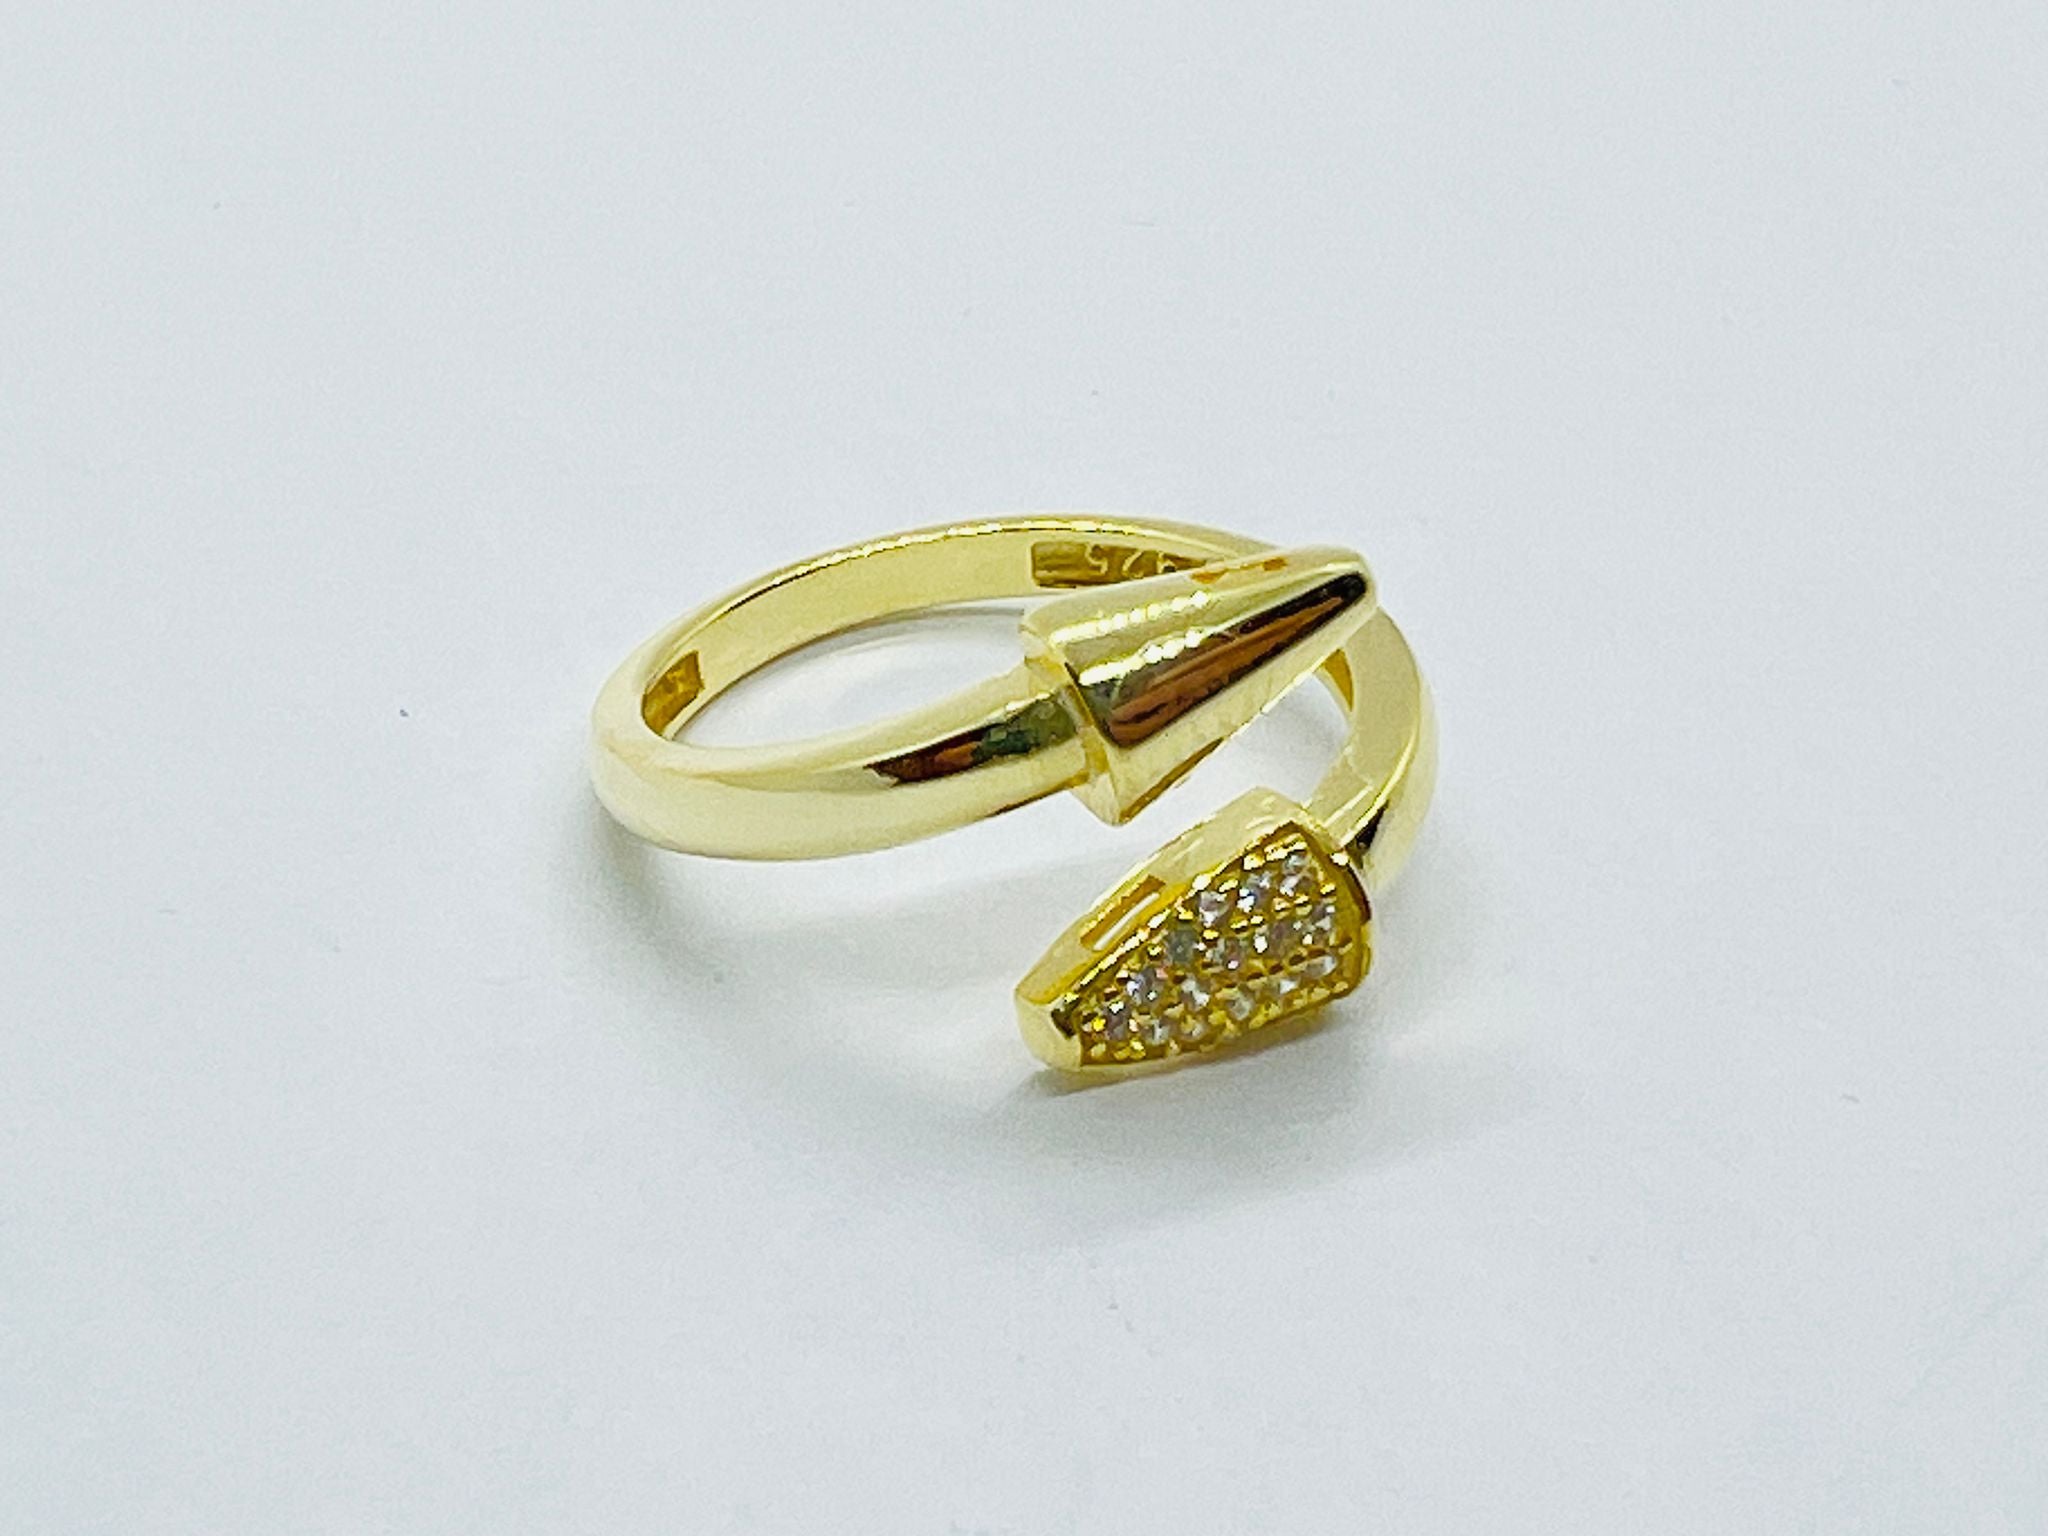 Ring Silver Yellow Gold Arrows Open Design - SVR9